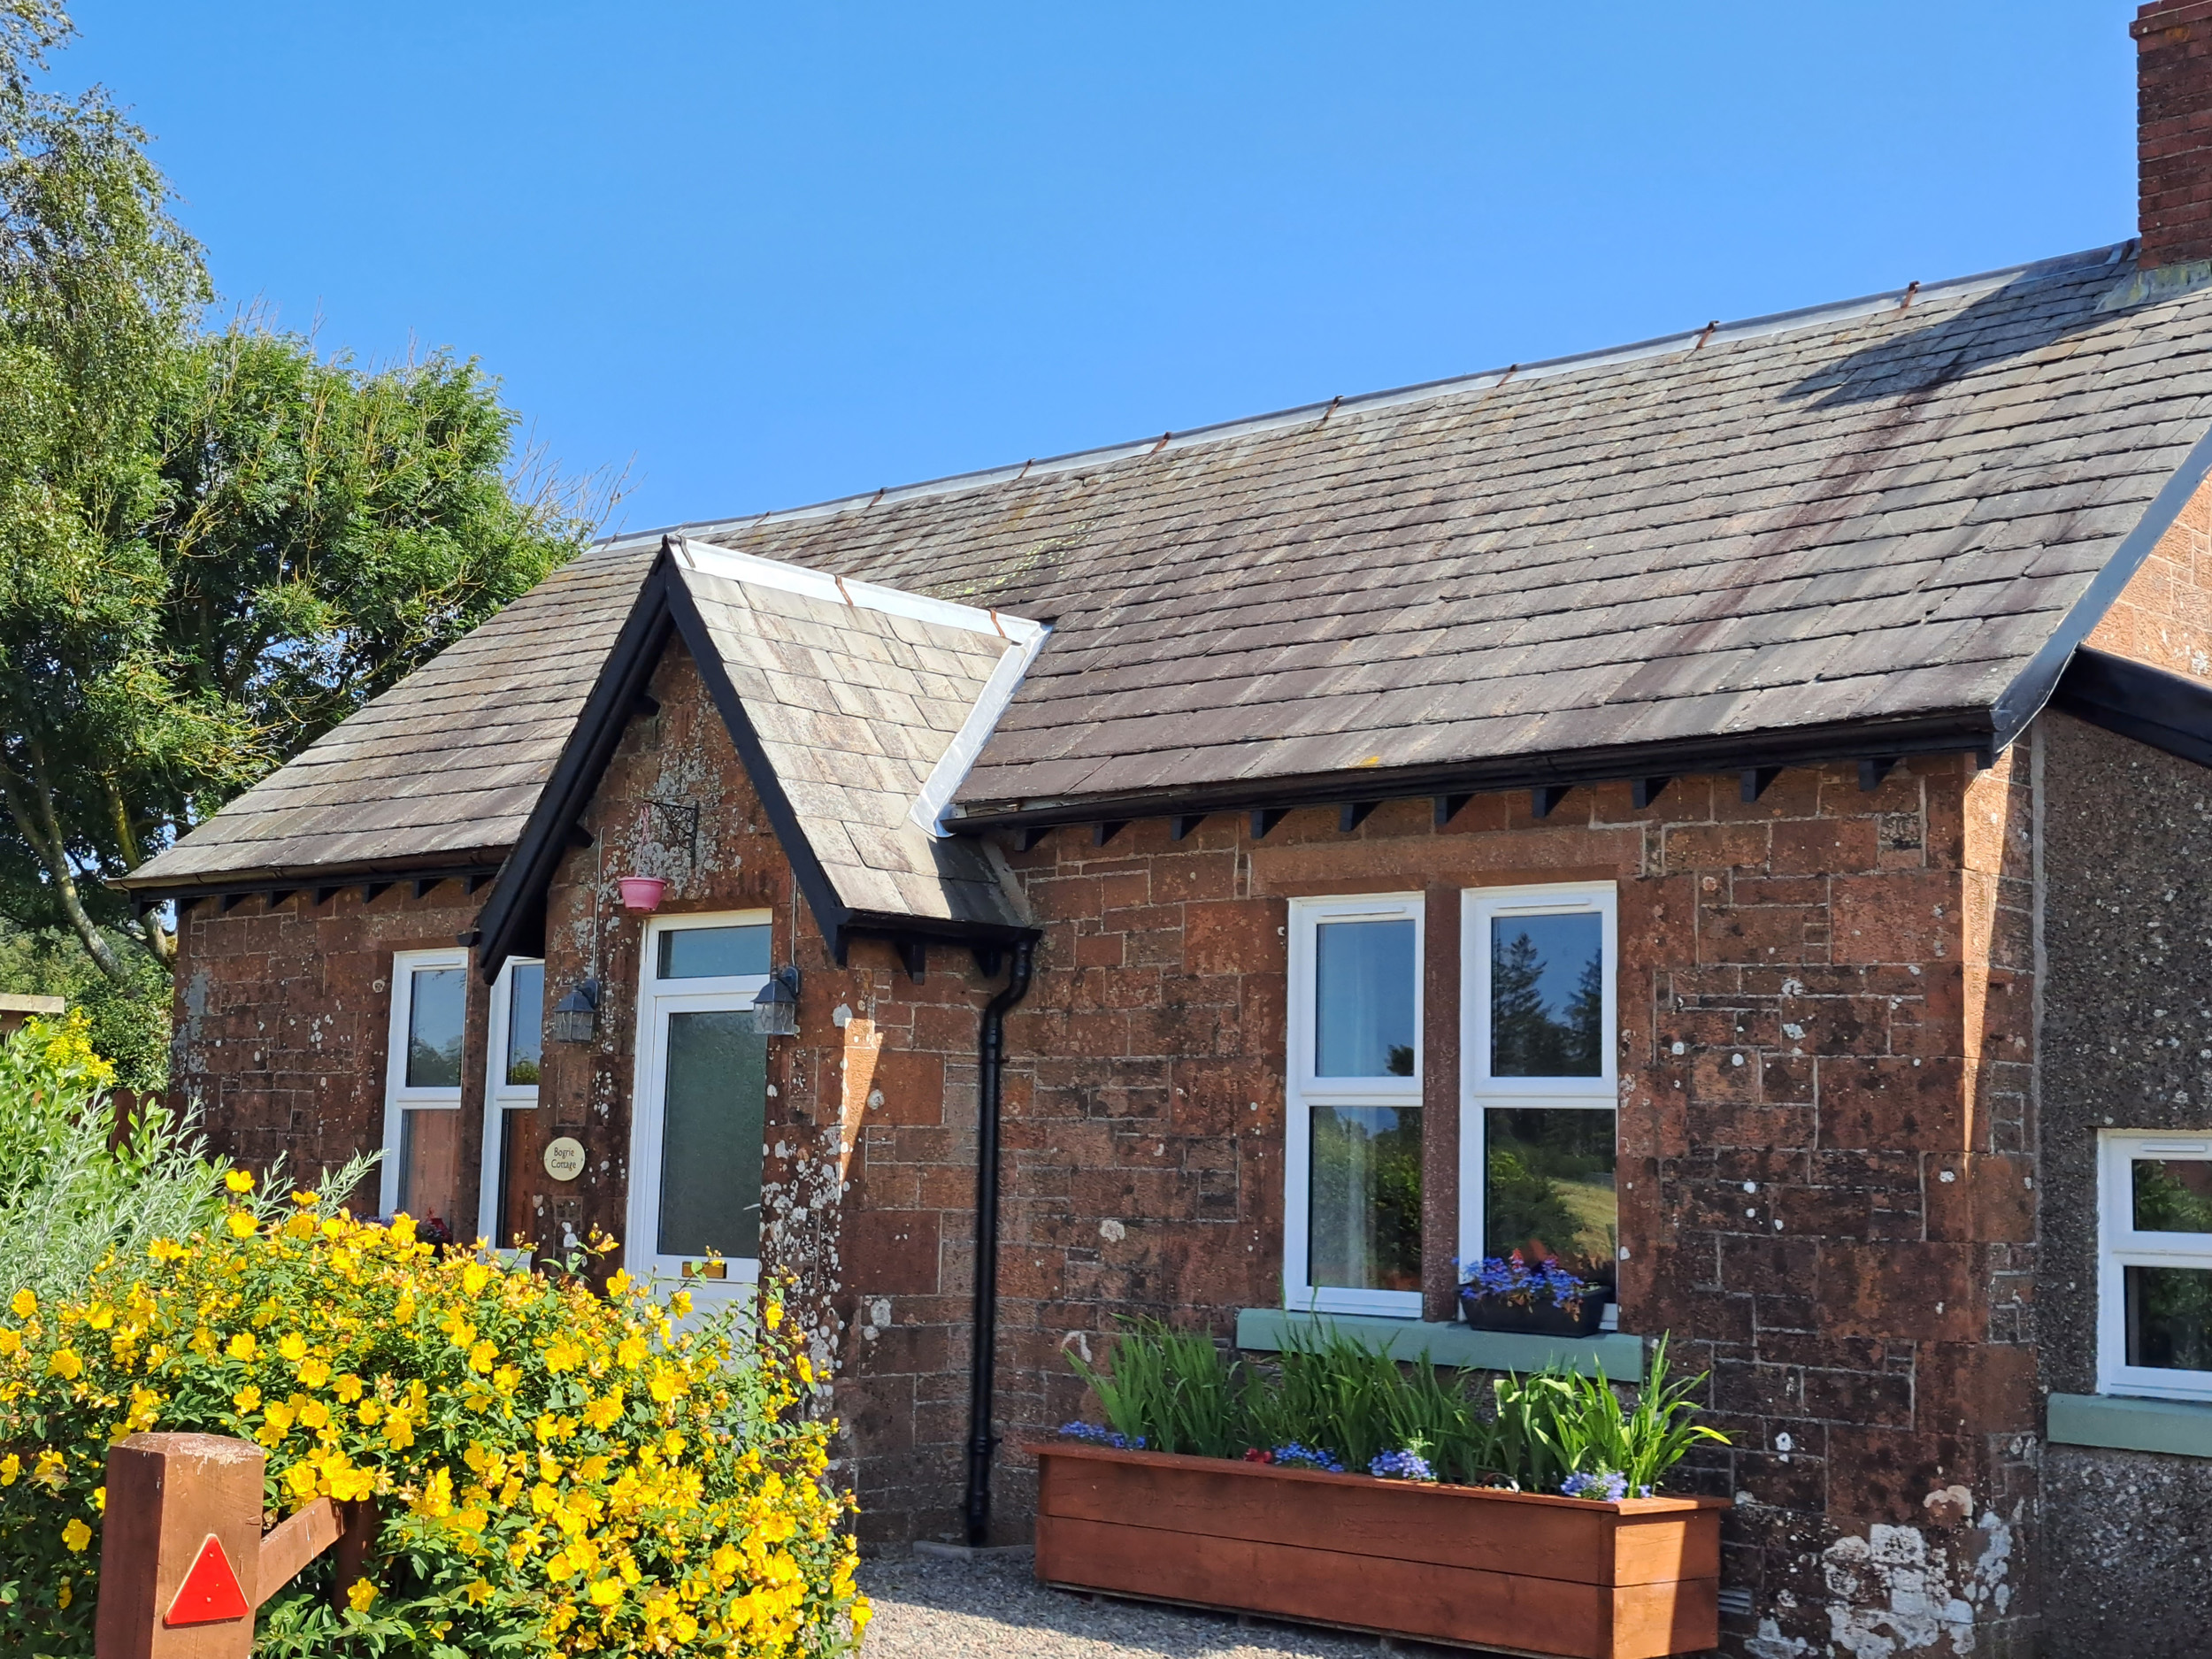 Bogire Country Cottage in Gretna Green, countryside, wood-fired hot tub, pizza oven, rural, romantic